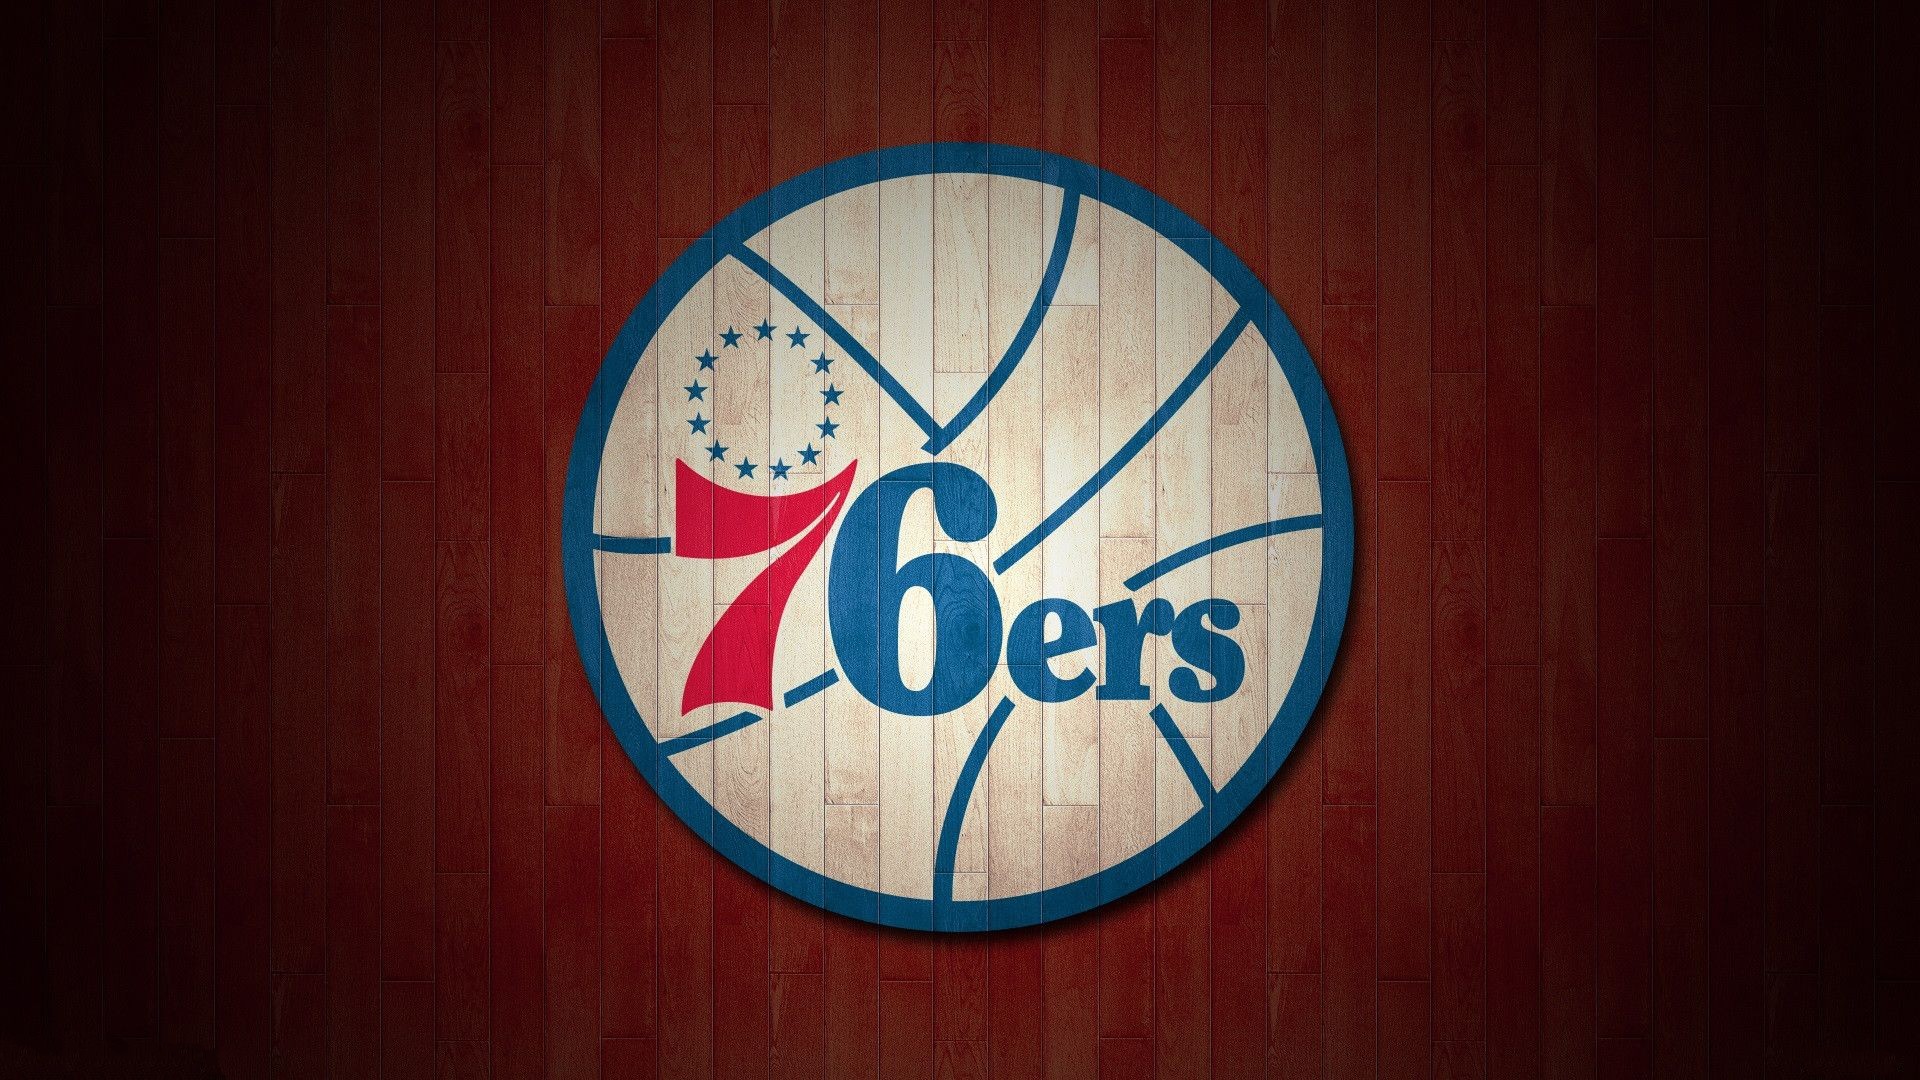 1920x1080 logo of 76ers wallpaper hd background wallpapers free amazing tablet smart  phone 4k high definition 